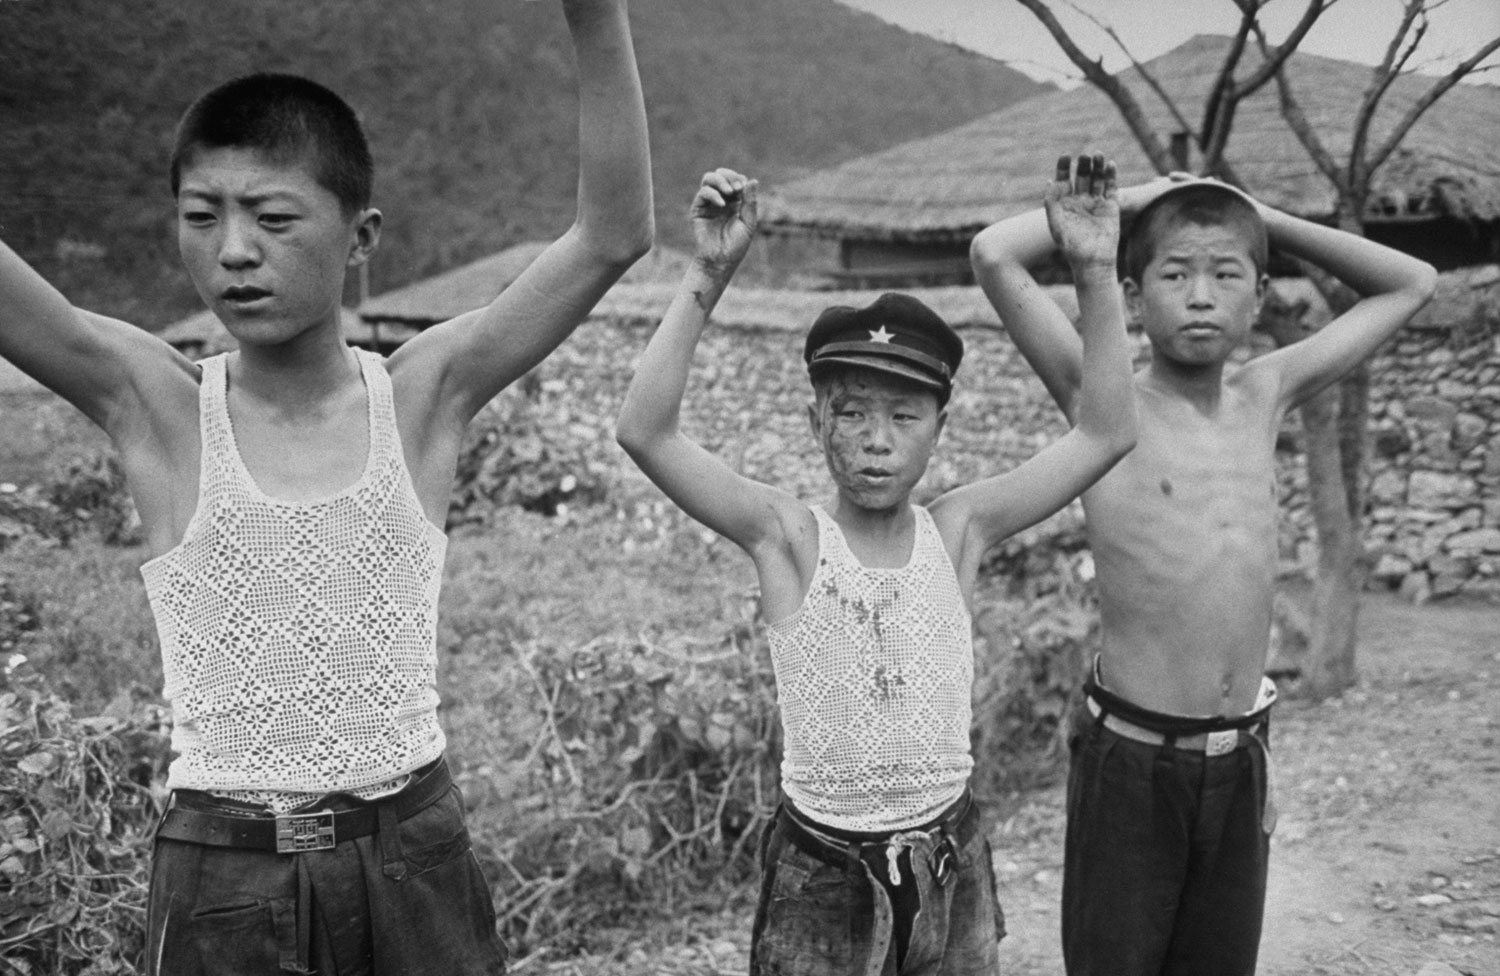 South Korean soldiers detain a group of suspected young communist rebels during an uprising against the Rhee government, 1948.